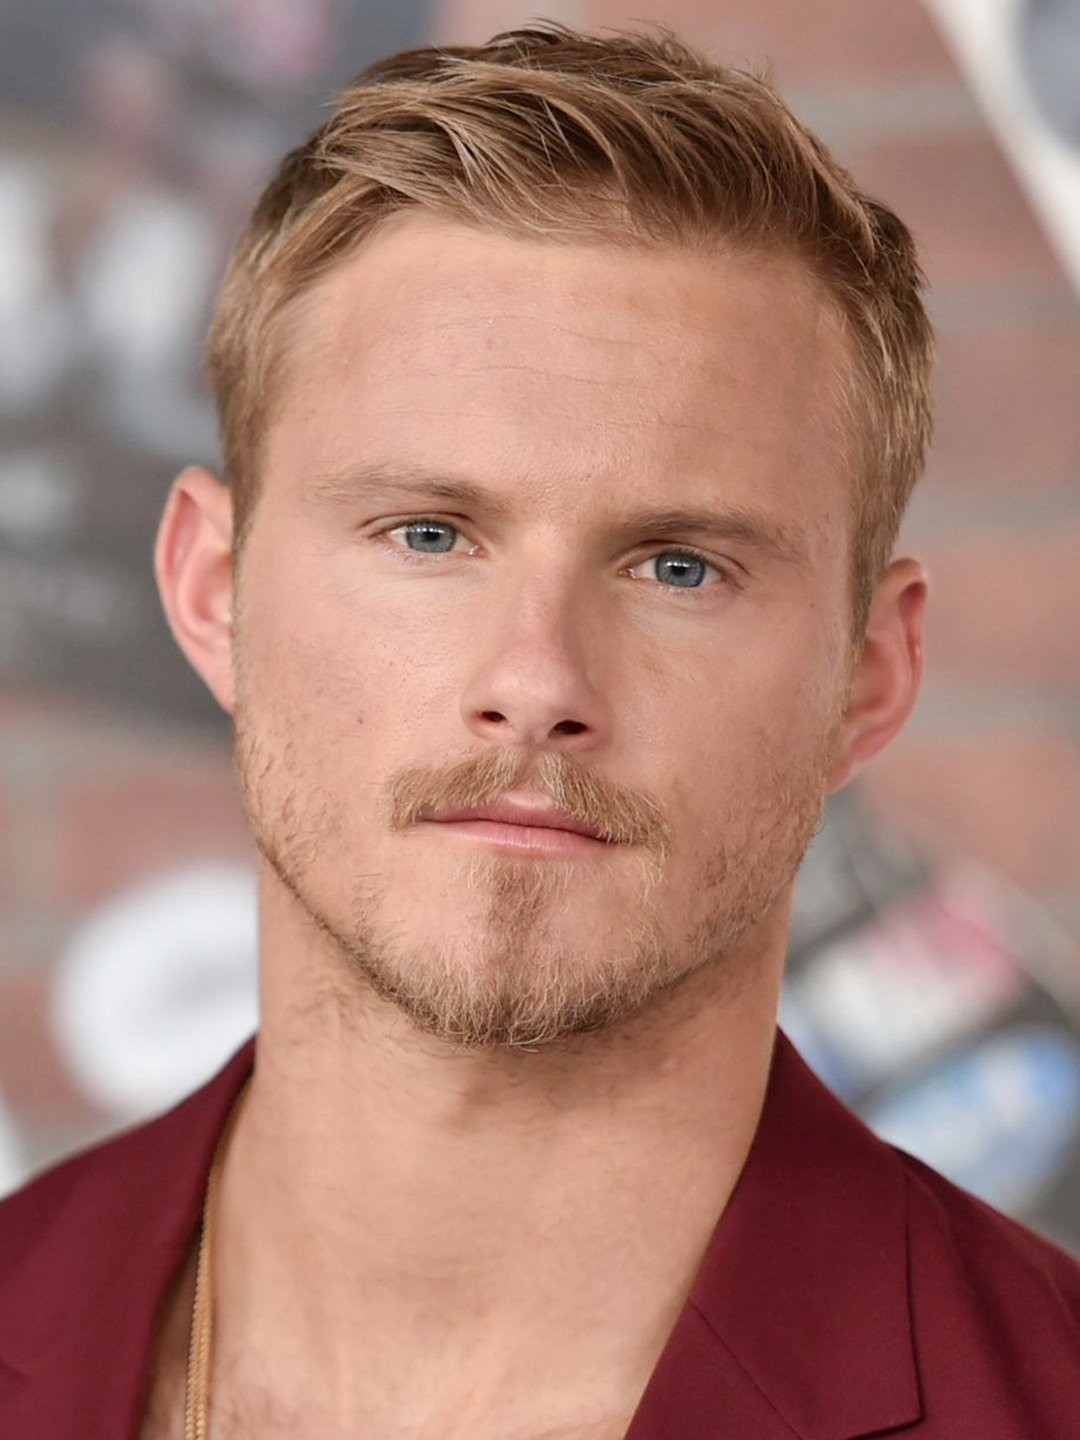 How tall is Vikings' Alexander Ludwig and who did he play in Hunger Games?